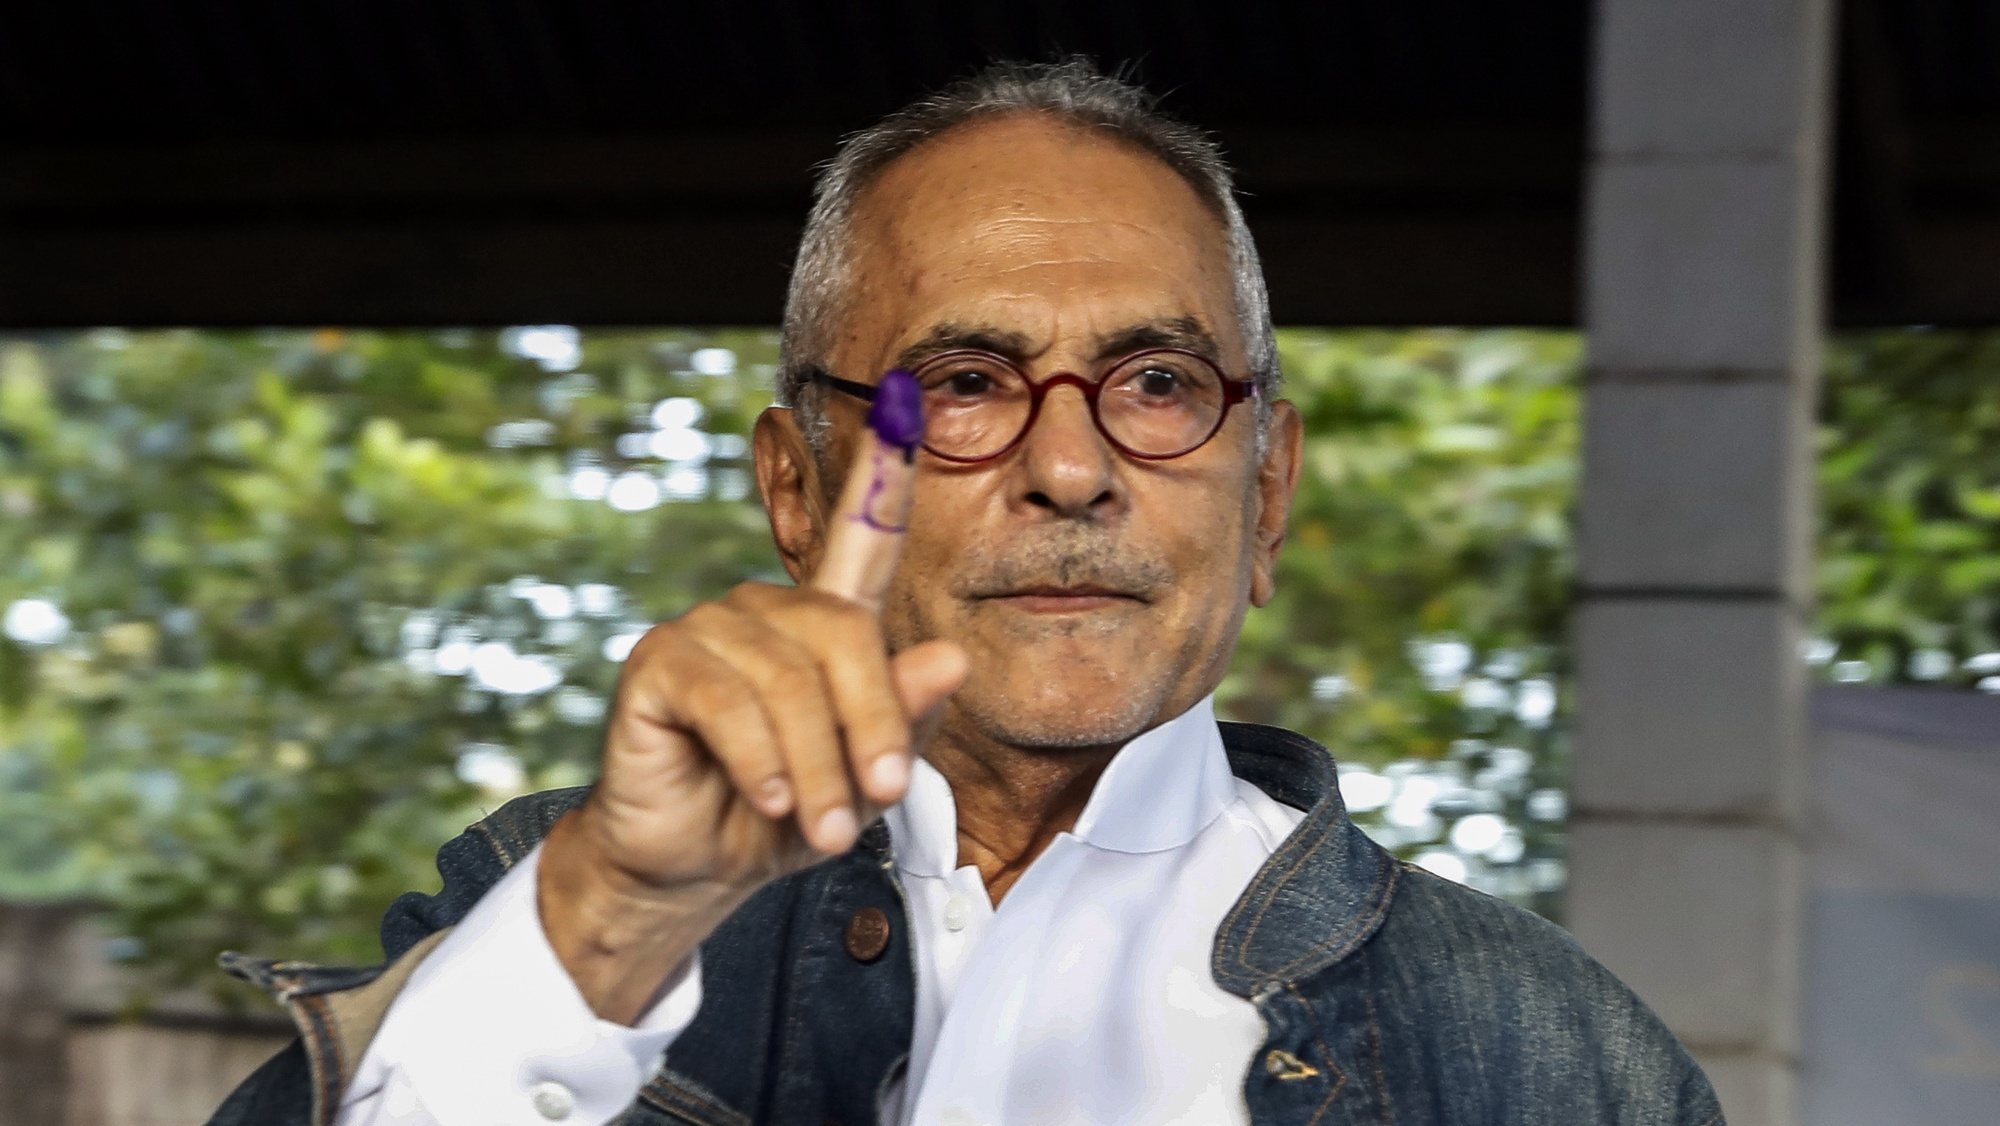 epa09896750 East Timor&#039;s presidential candidate and former president Jose Ramos Horta shows his marked finger after casting his vote during the presidential runoff election at a polling station in Dili, East Timor, also known as Timor Leste, 19 April 2022. People in Timor Leste vote for their next president in a runoff election between former president and Nobel Peace Prize laureate Jose Ramos Horta, and incumbent president Francisco Guterres.  EPA/ANTONIO DASIPARU